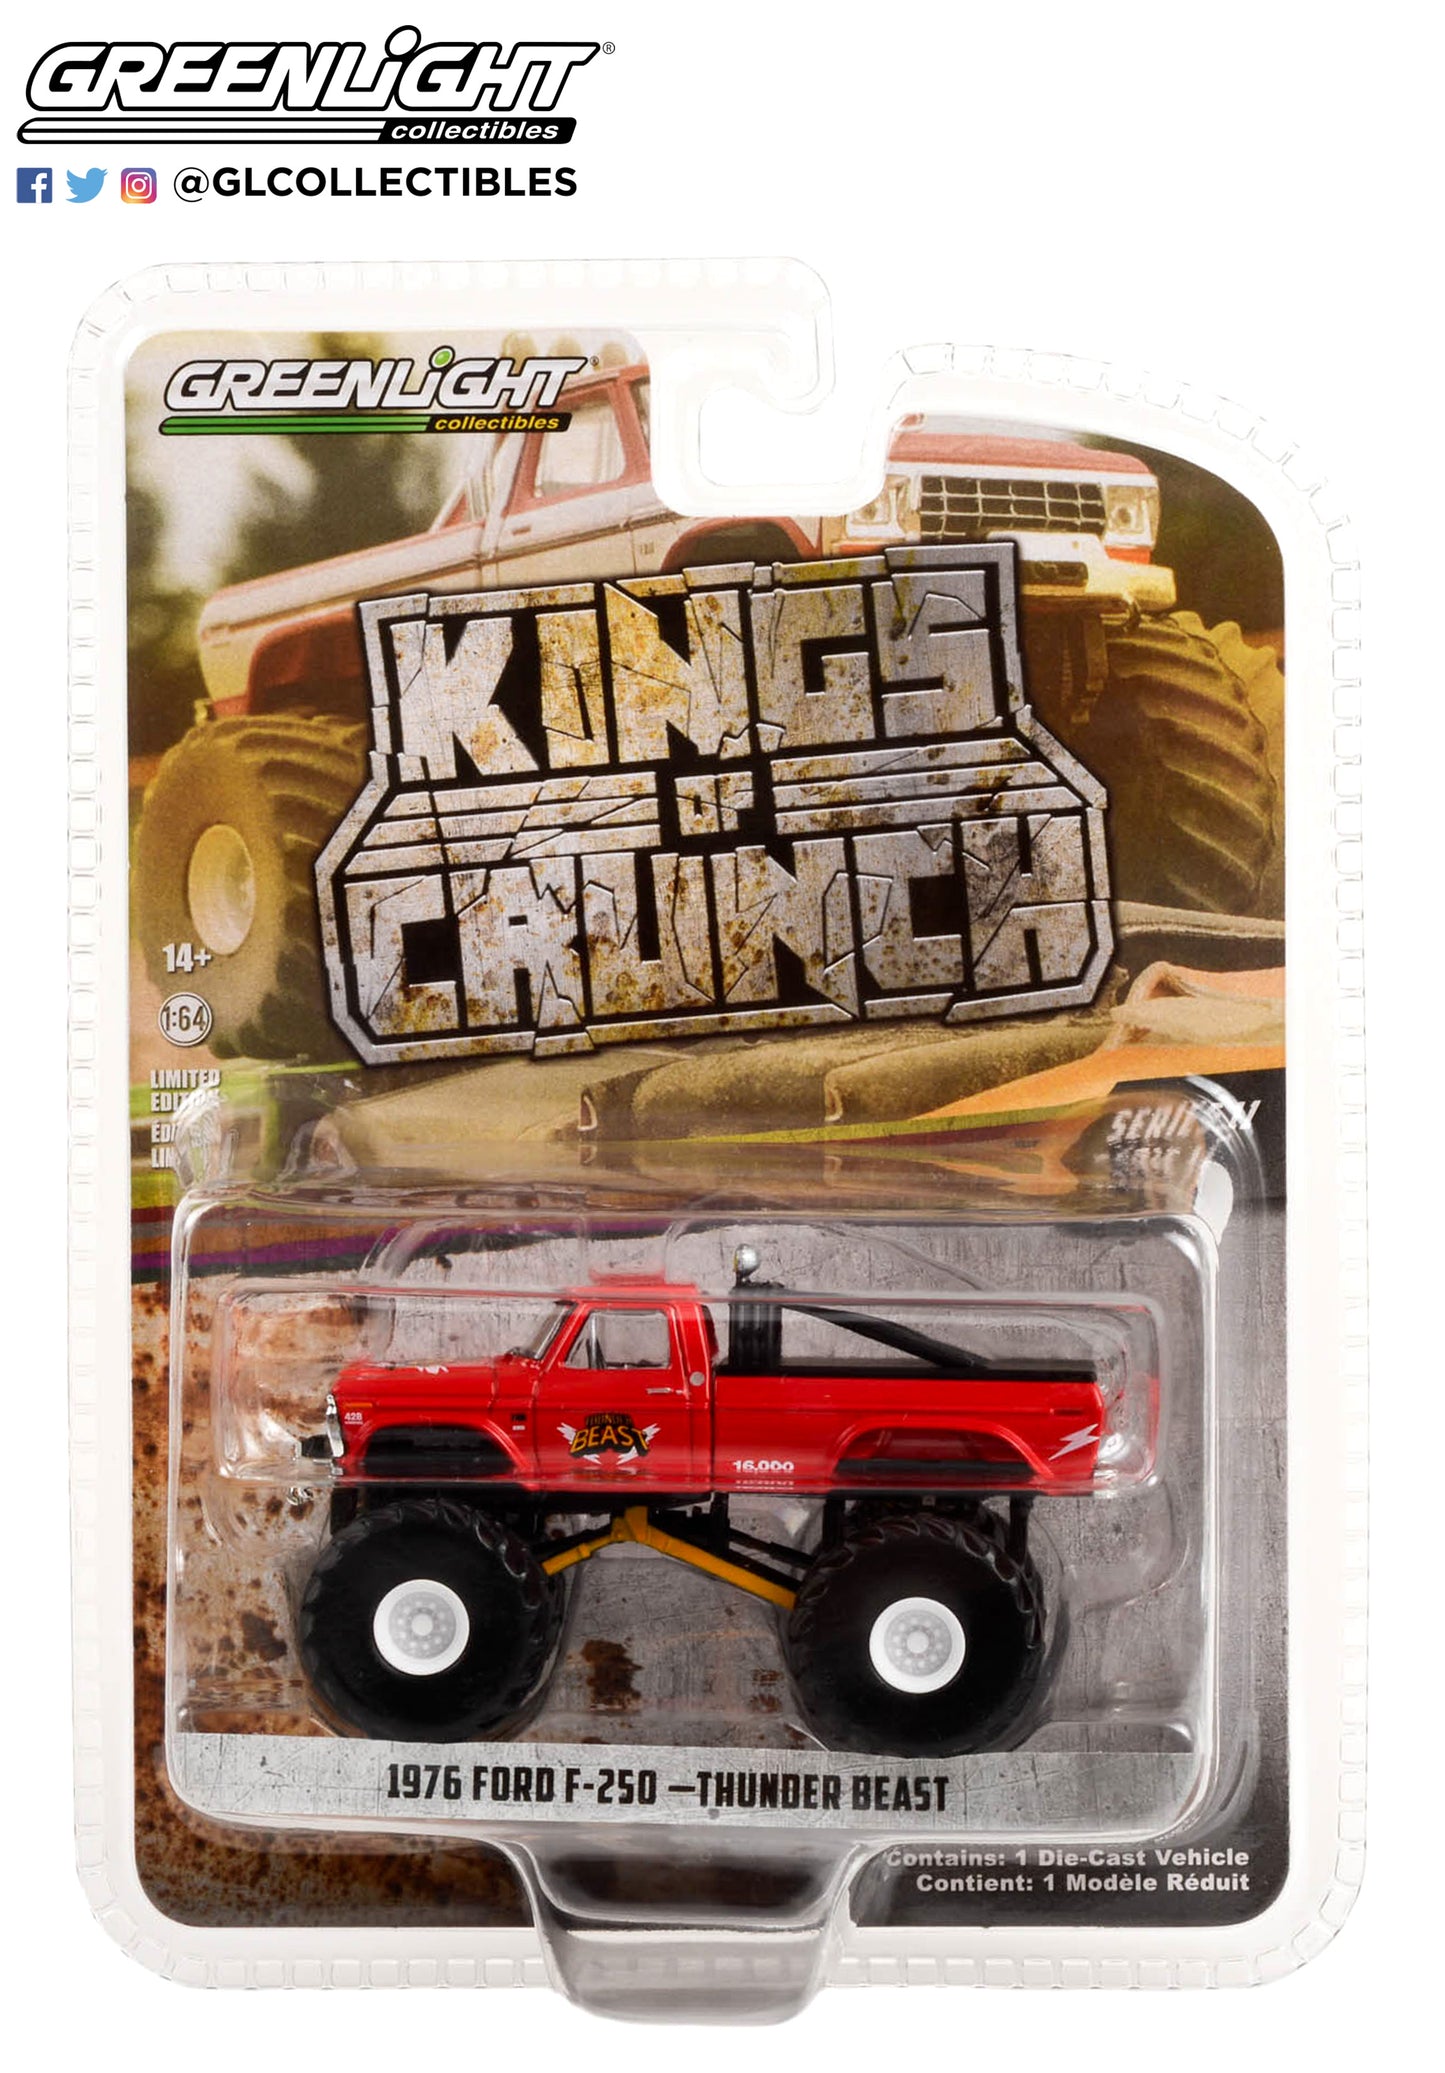 GreenLight 1:64 Kings of Crunch Series 11 - Thunder Beast - 1976 Ford F-250 Monster Truck Solid Pack 49110-B